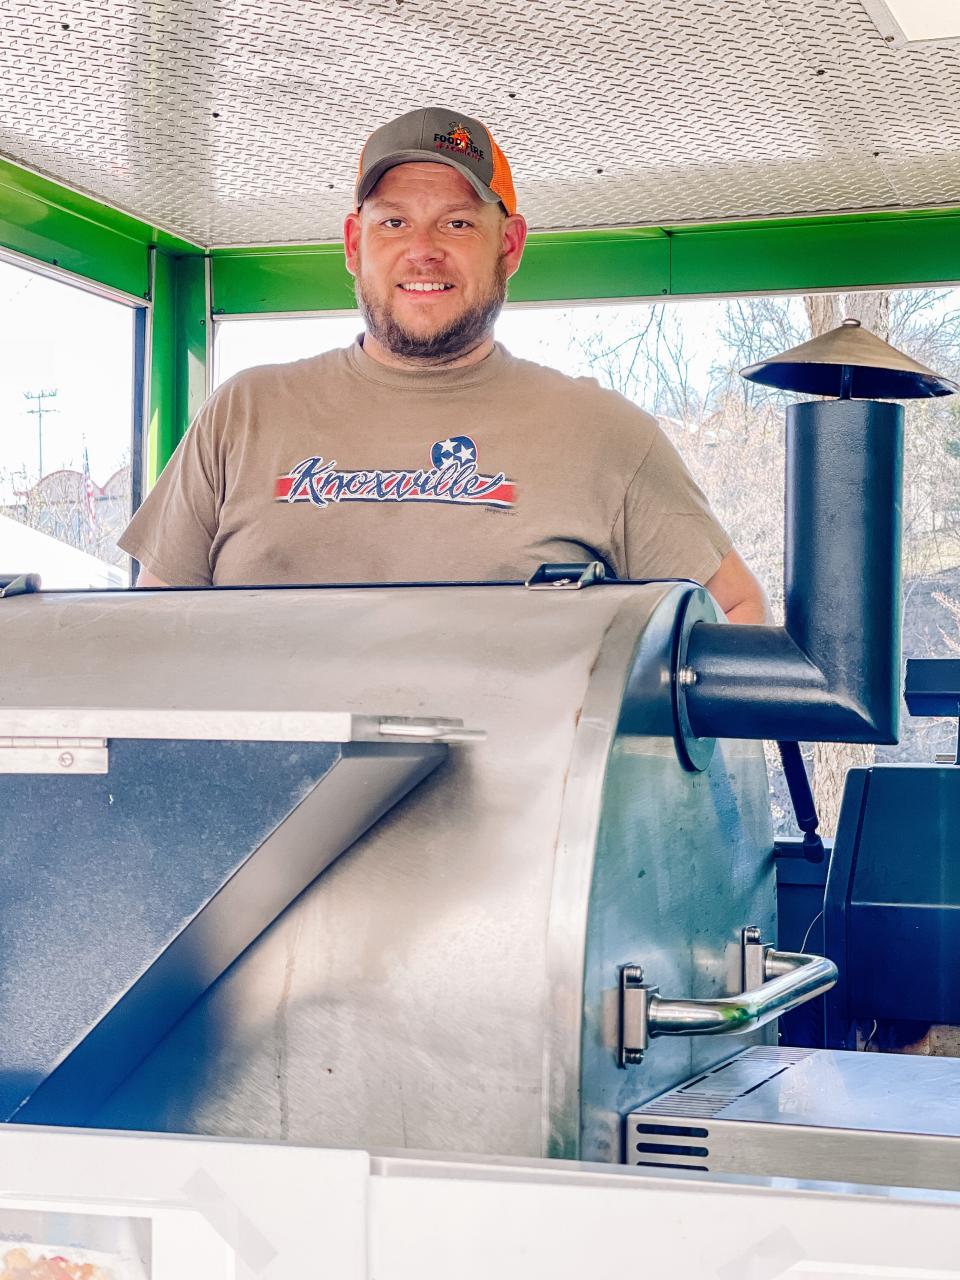 Jesse Thompson of Halls, owner of Food Fire and Ferment food truck, serves lunch at the Regal headquarters in South Knoxville on March 4, 2022.